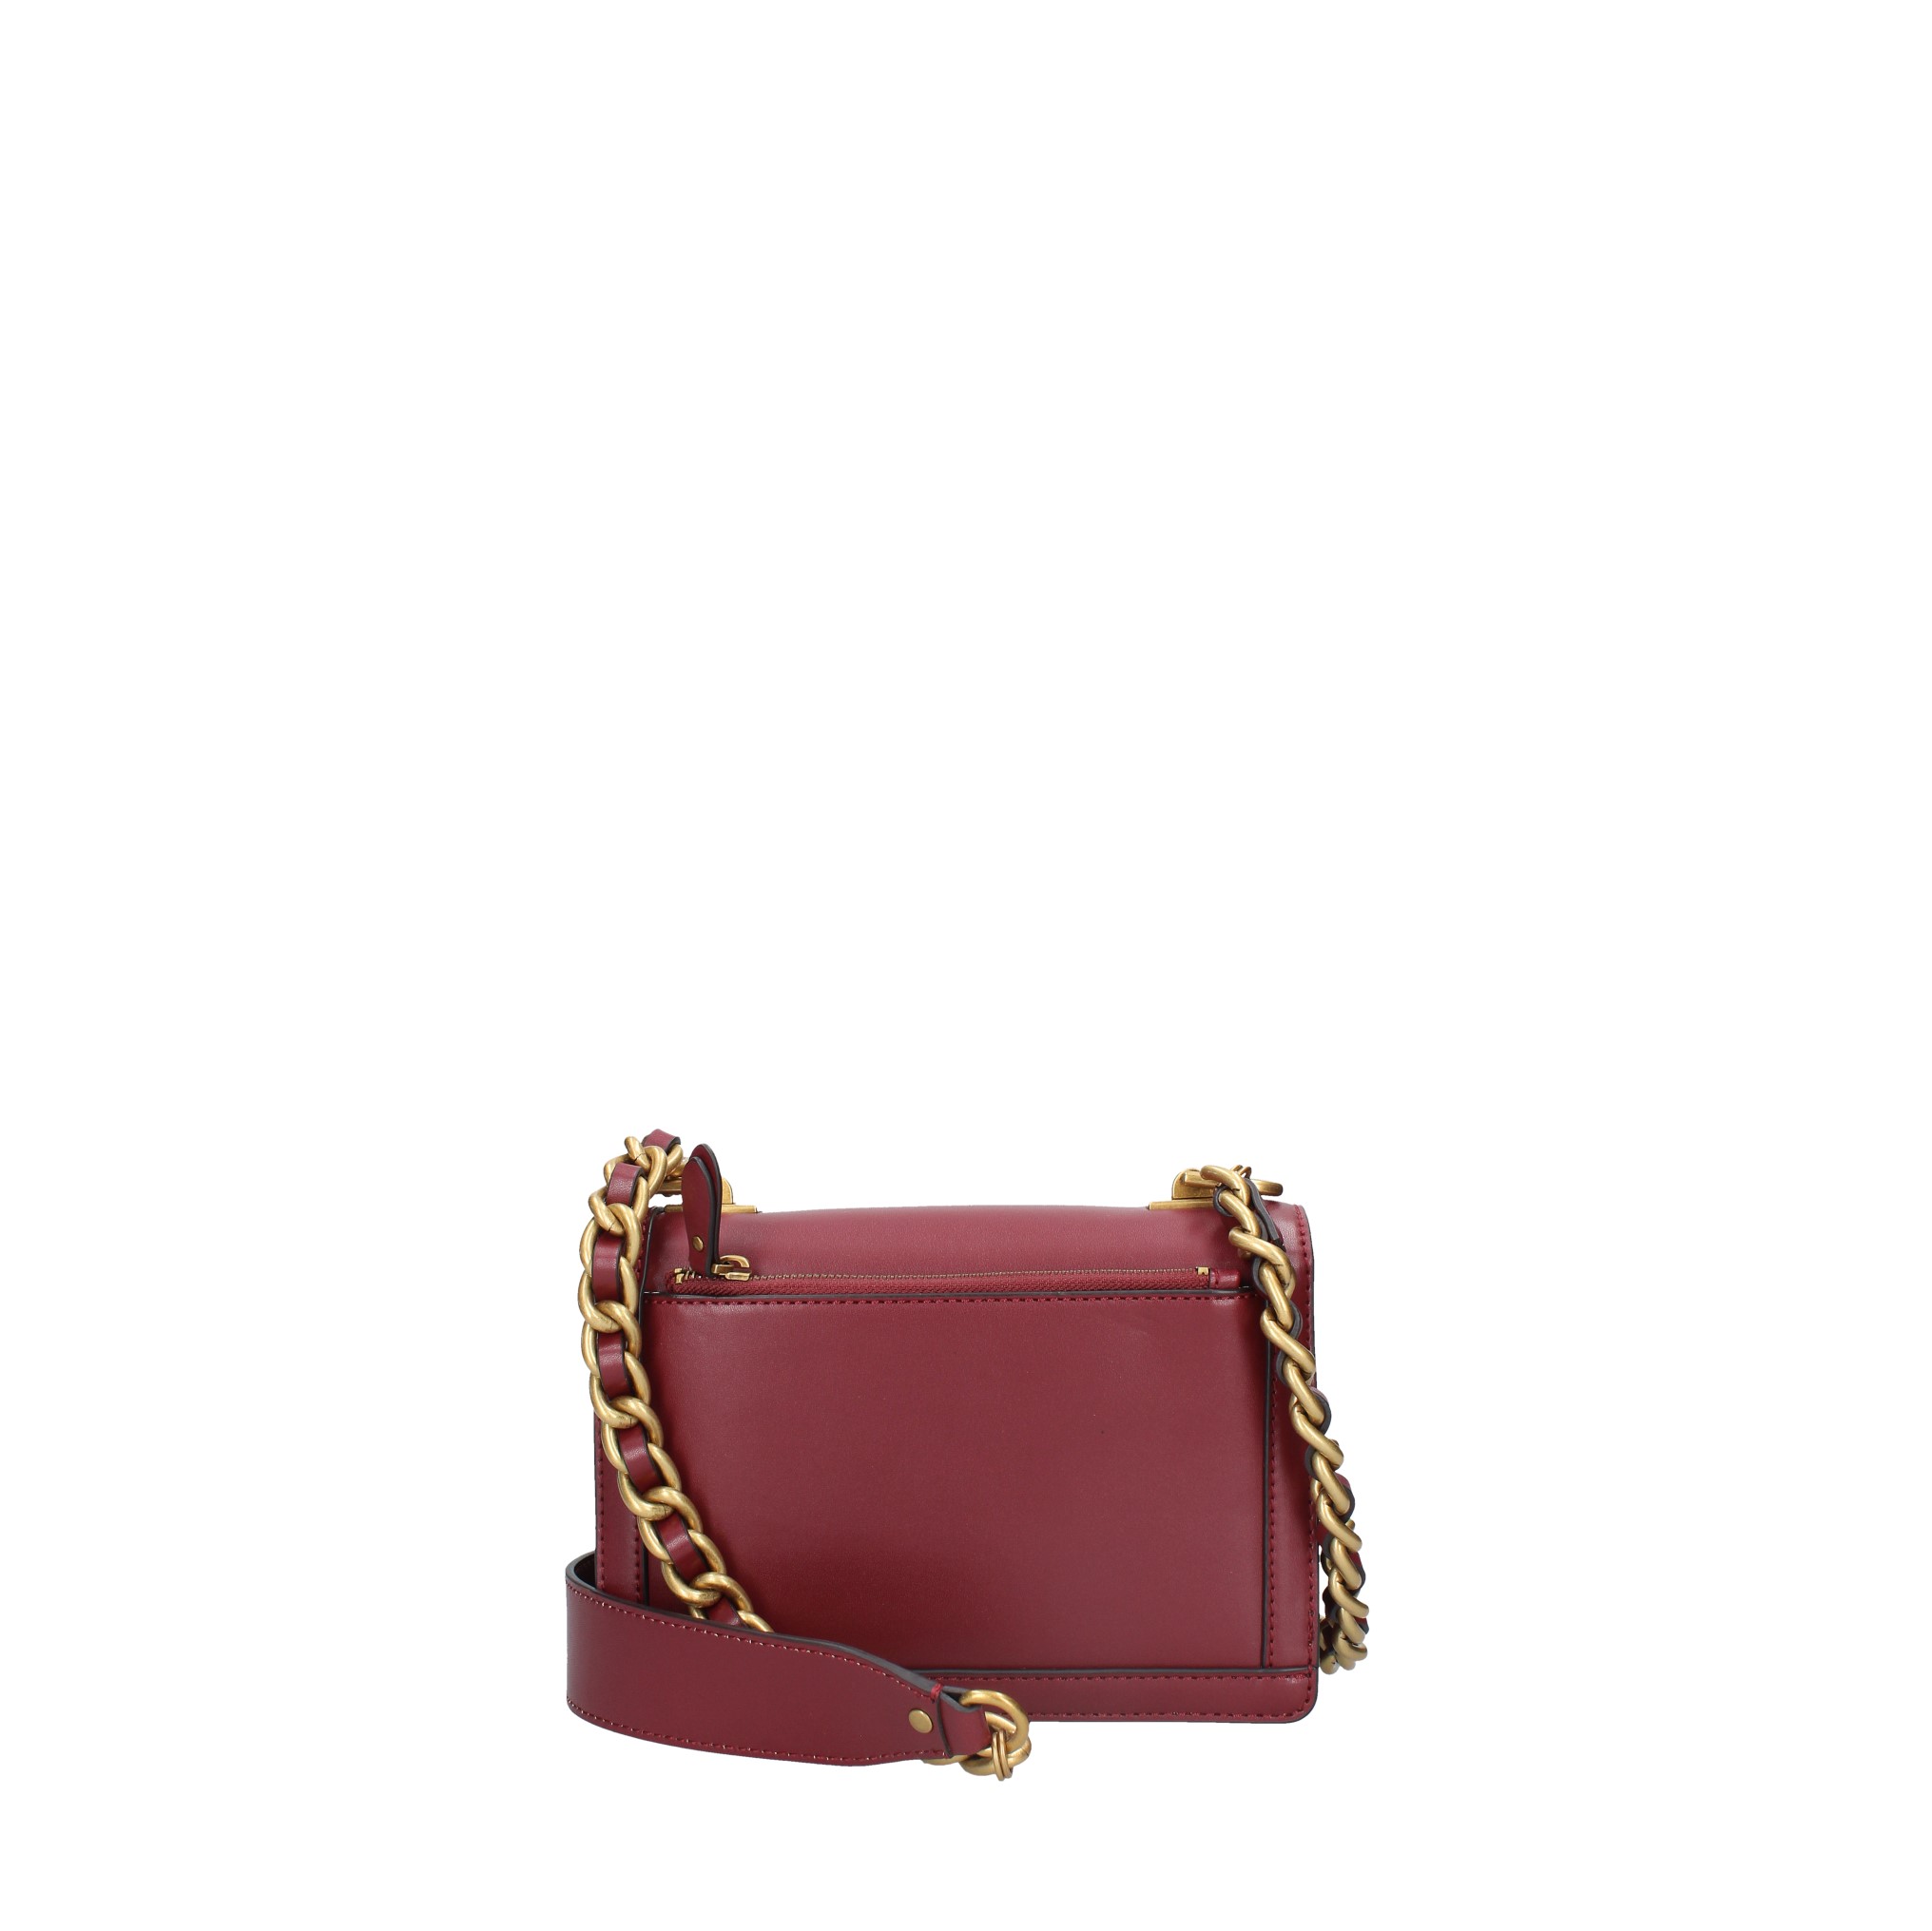 Tracolla in ecopelle GUESS | HWVB8558210ROSSO